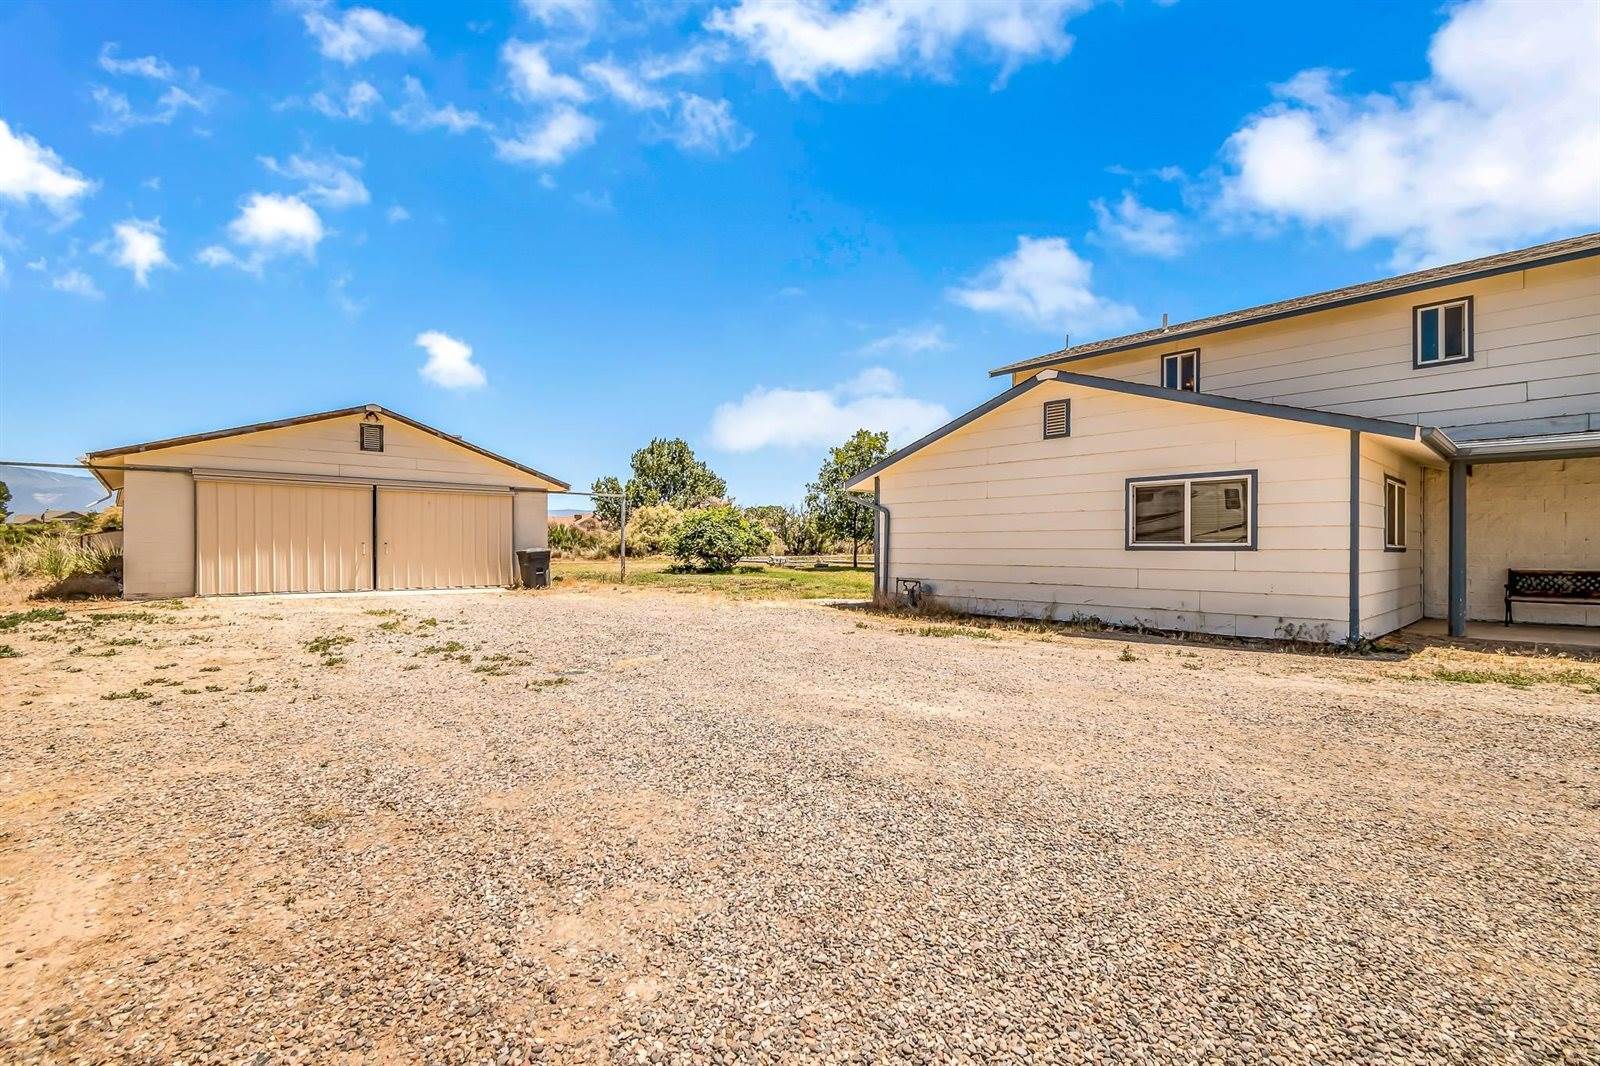 242 31 Road, Grand Junction, CO 81503